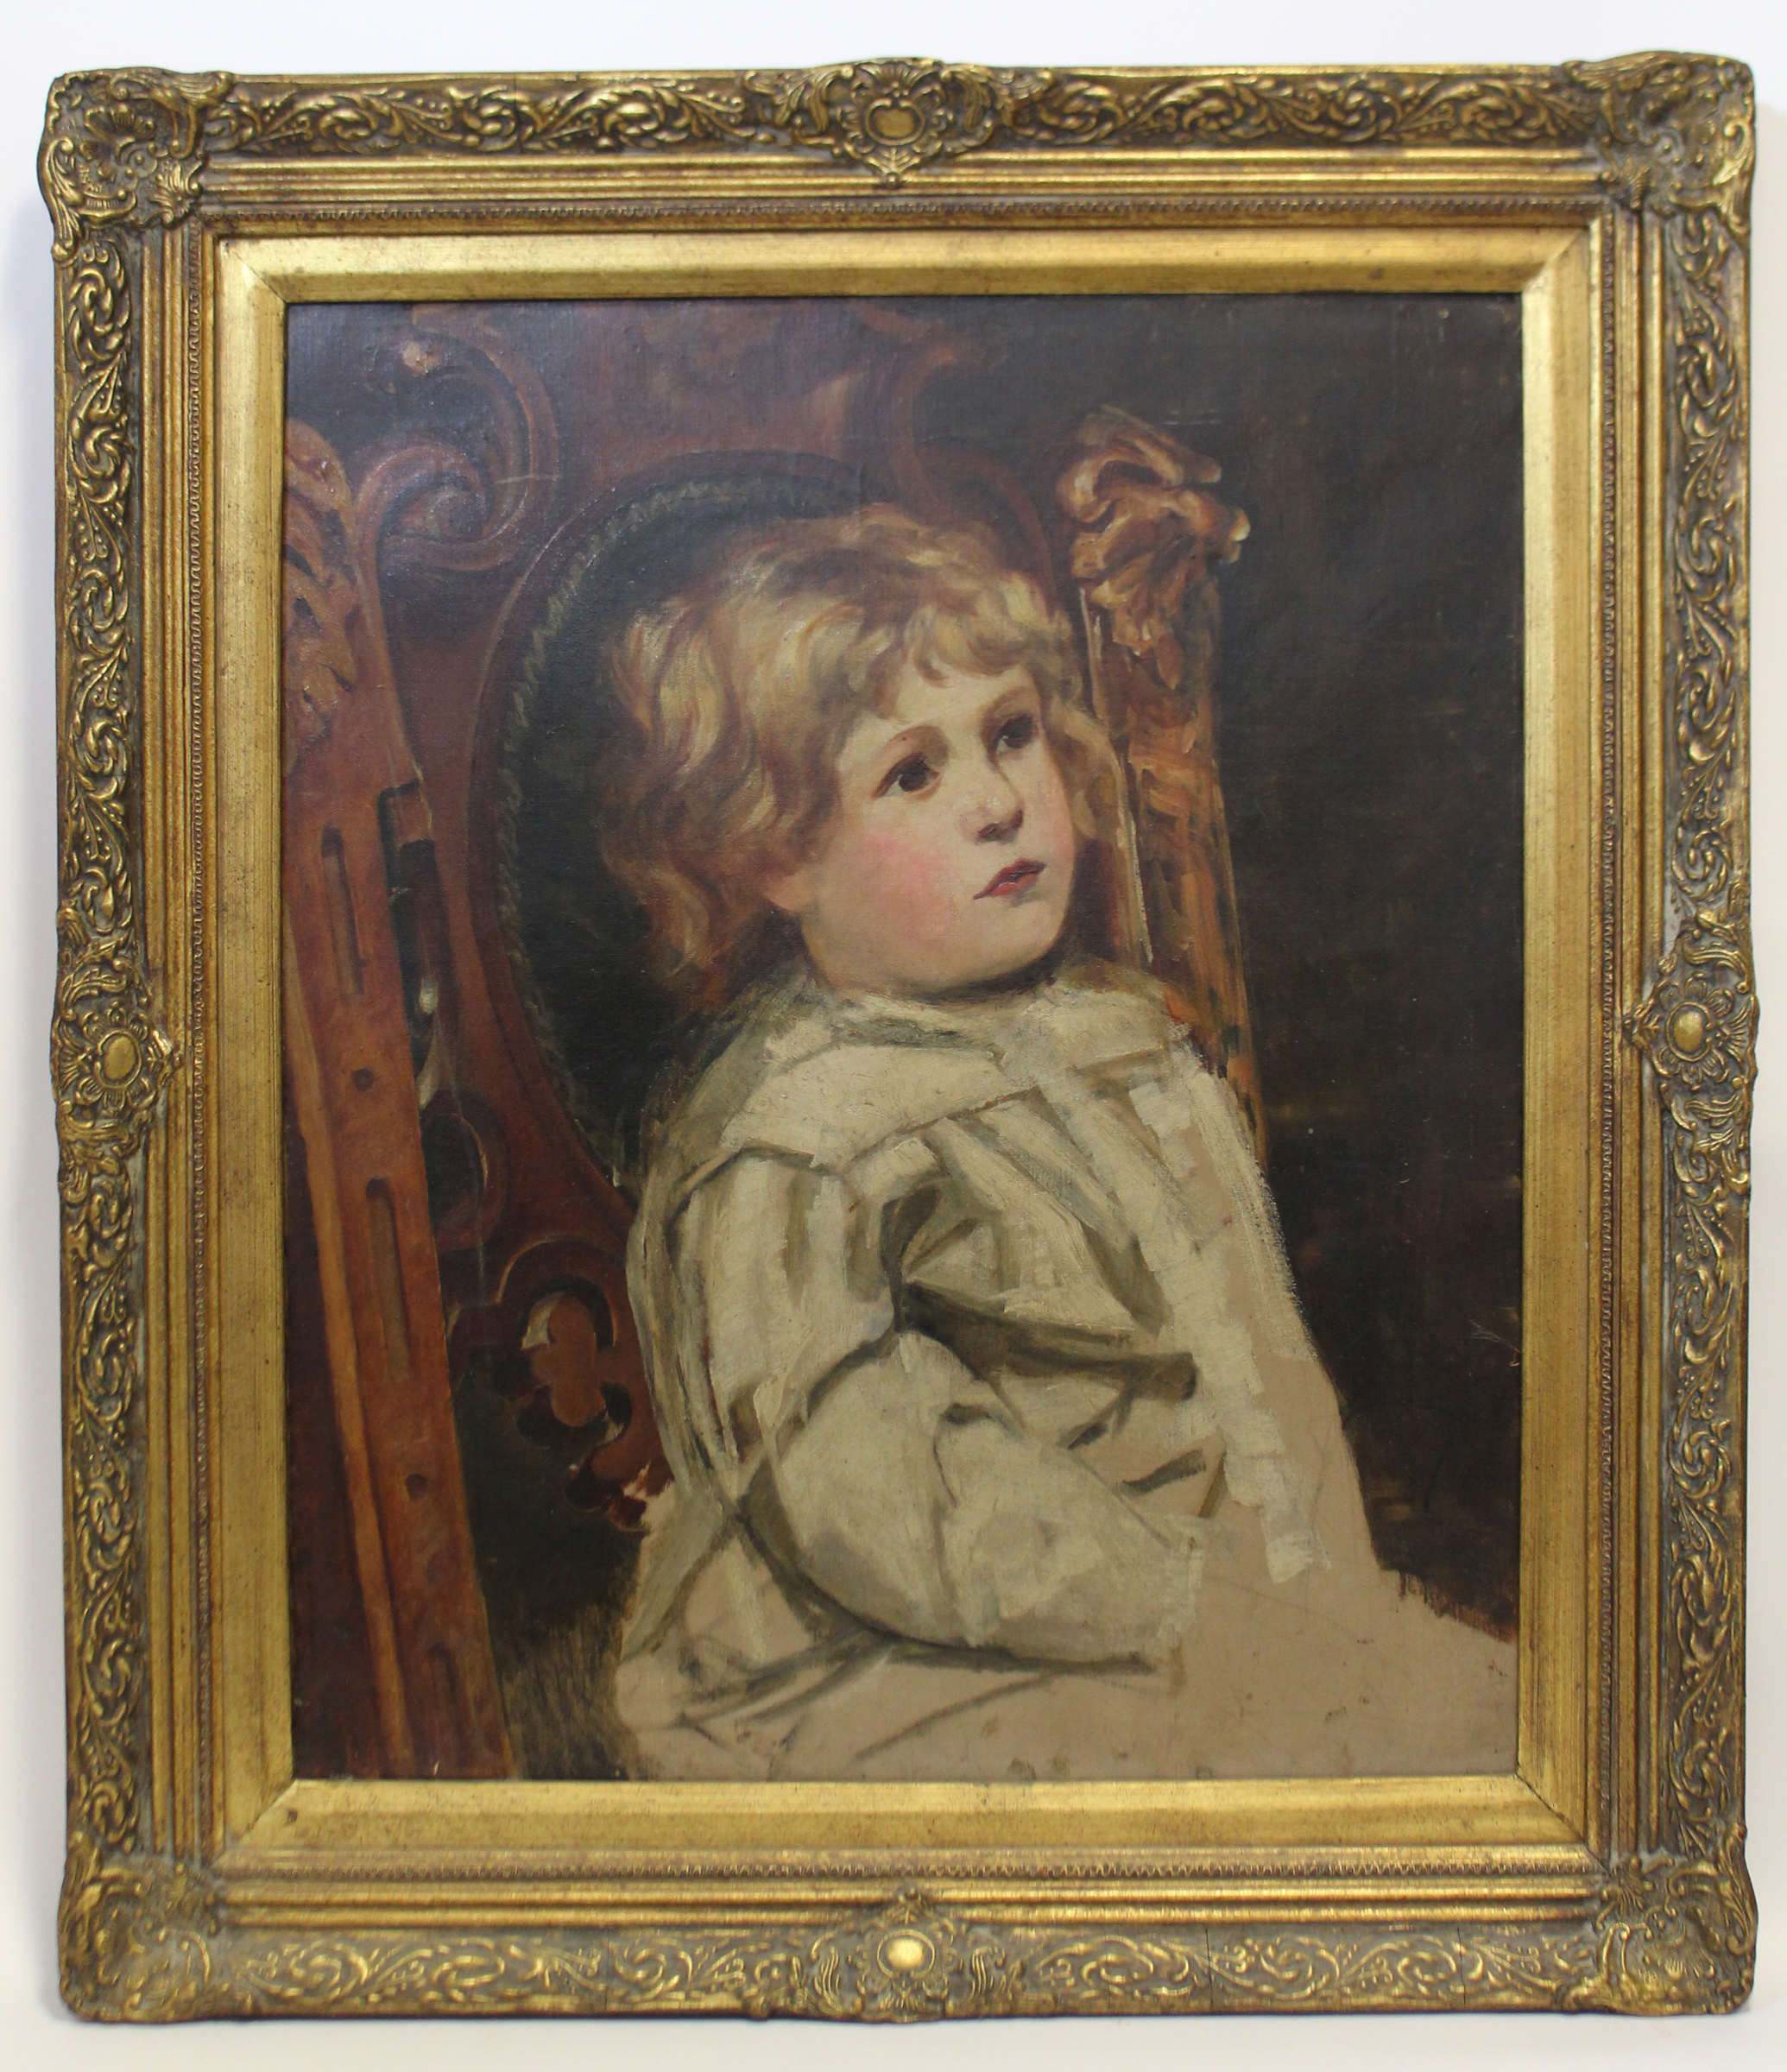 ENGLISH SCHOOL, late 19th century. A half-length portrait of a young child seated in a carved oak